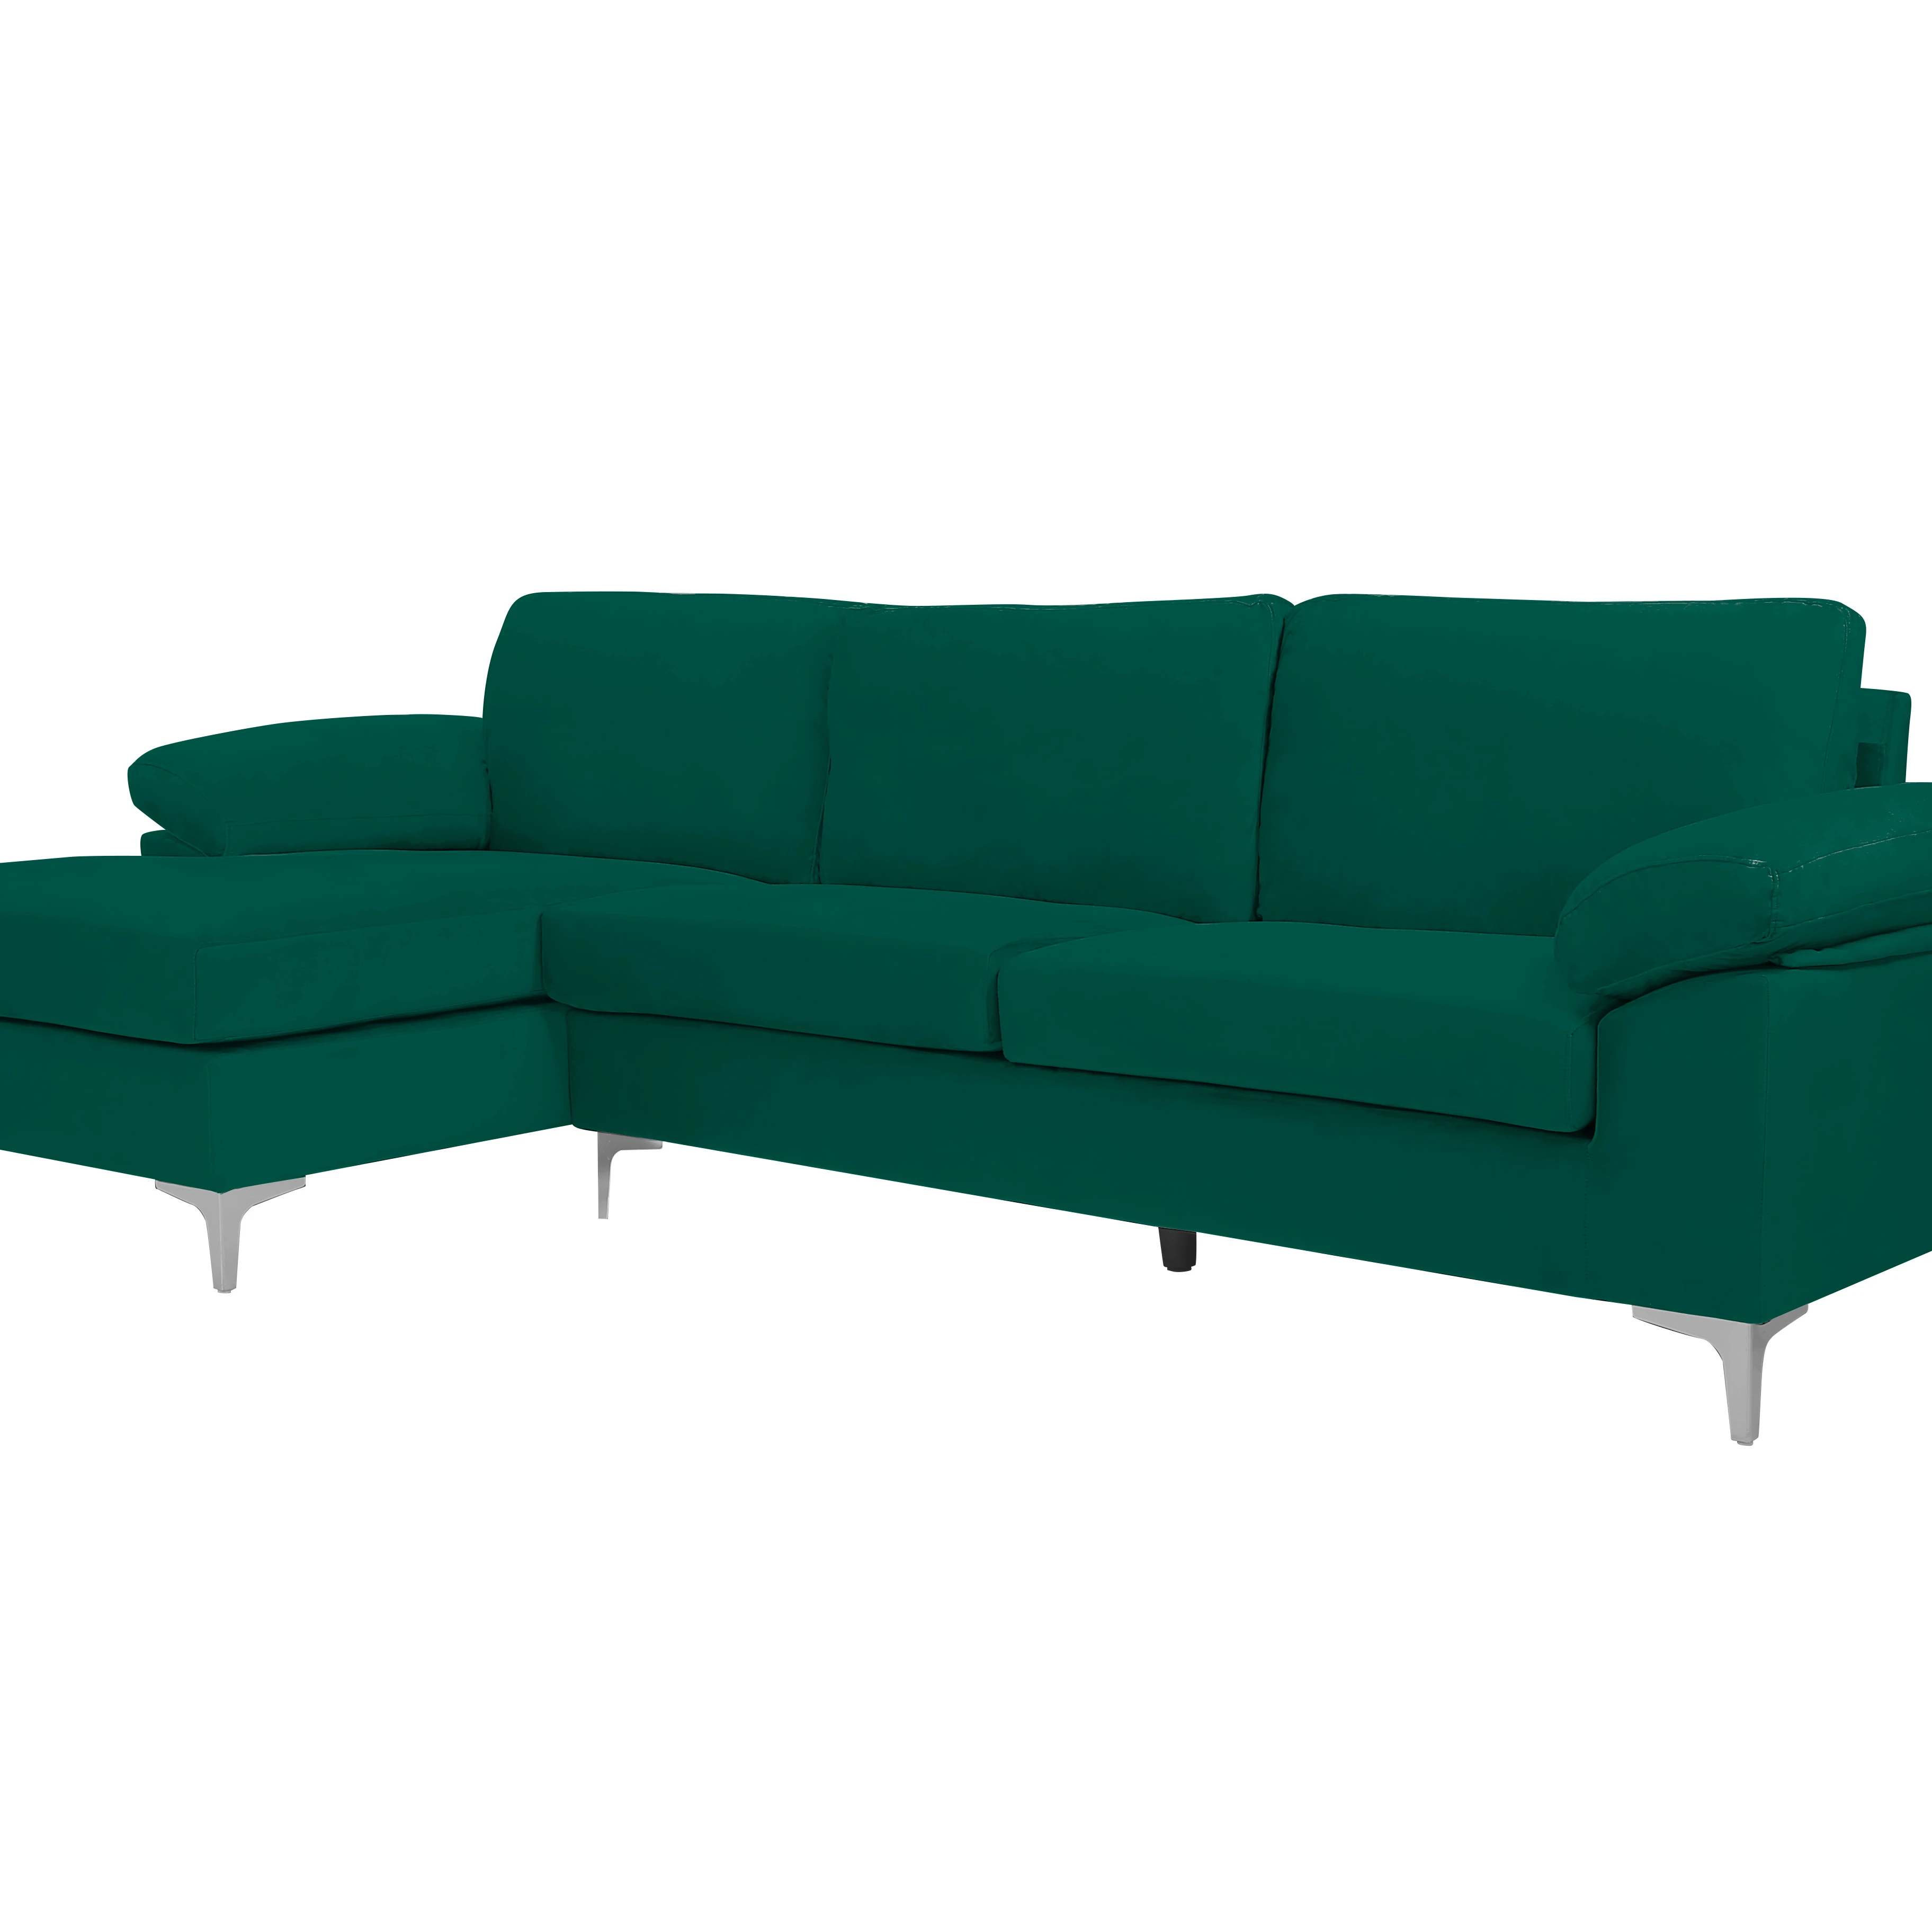 

L shape Modern style fabric sofa set sectionals living room sofa set for home furniture Recliner sleeper sofa bed, Green